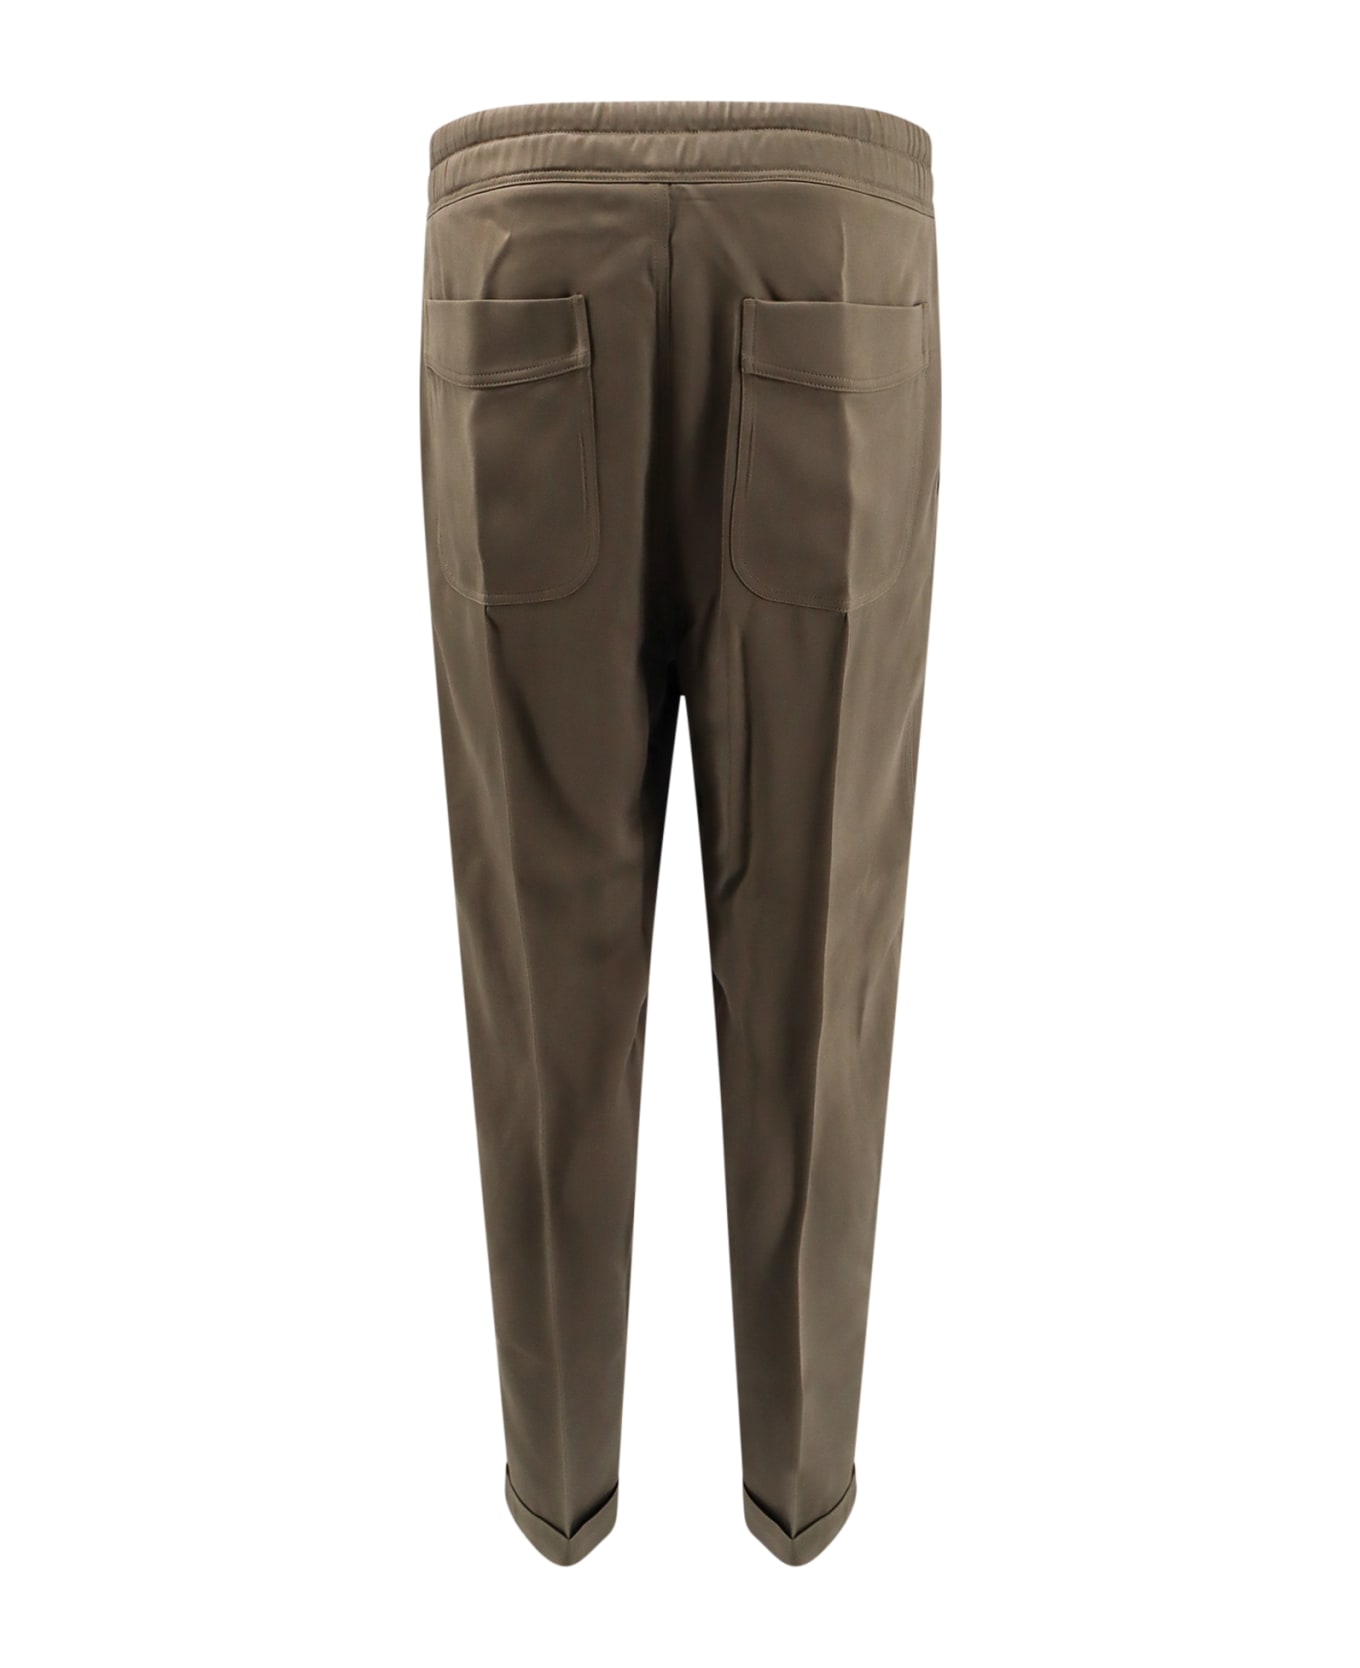 Tom Ford Trouser - Green ボトムス